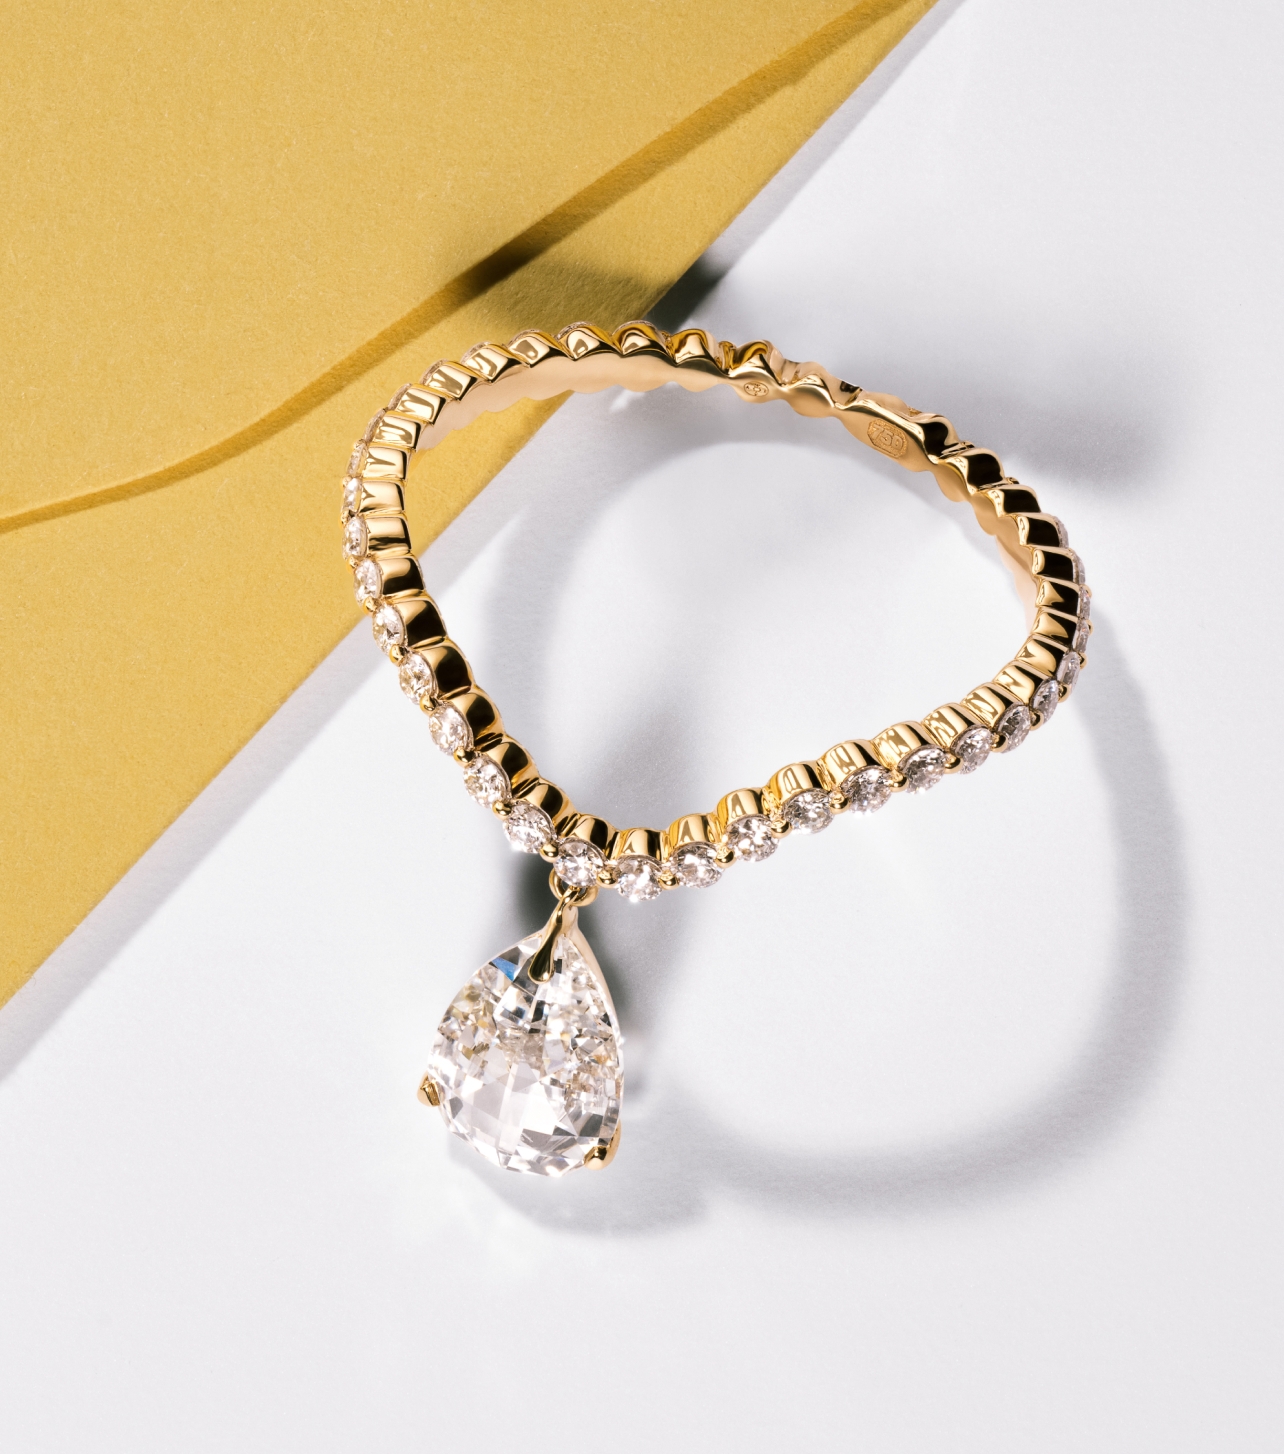 Tear signature cut lab-grown diamond ring crafted in 18k recycled gold. 